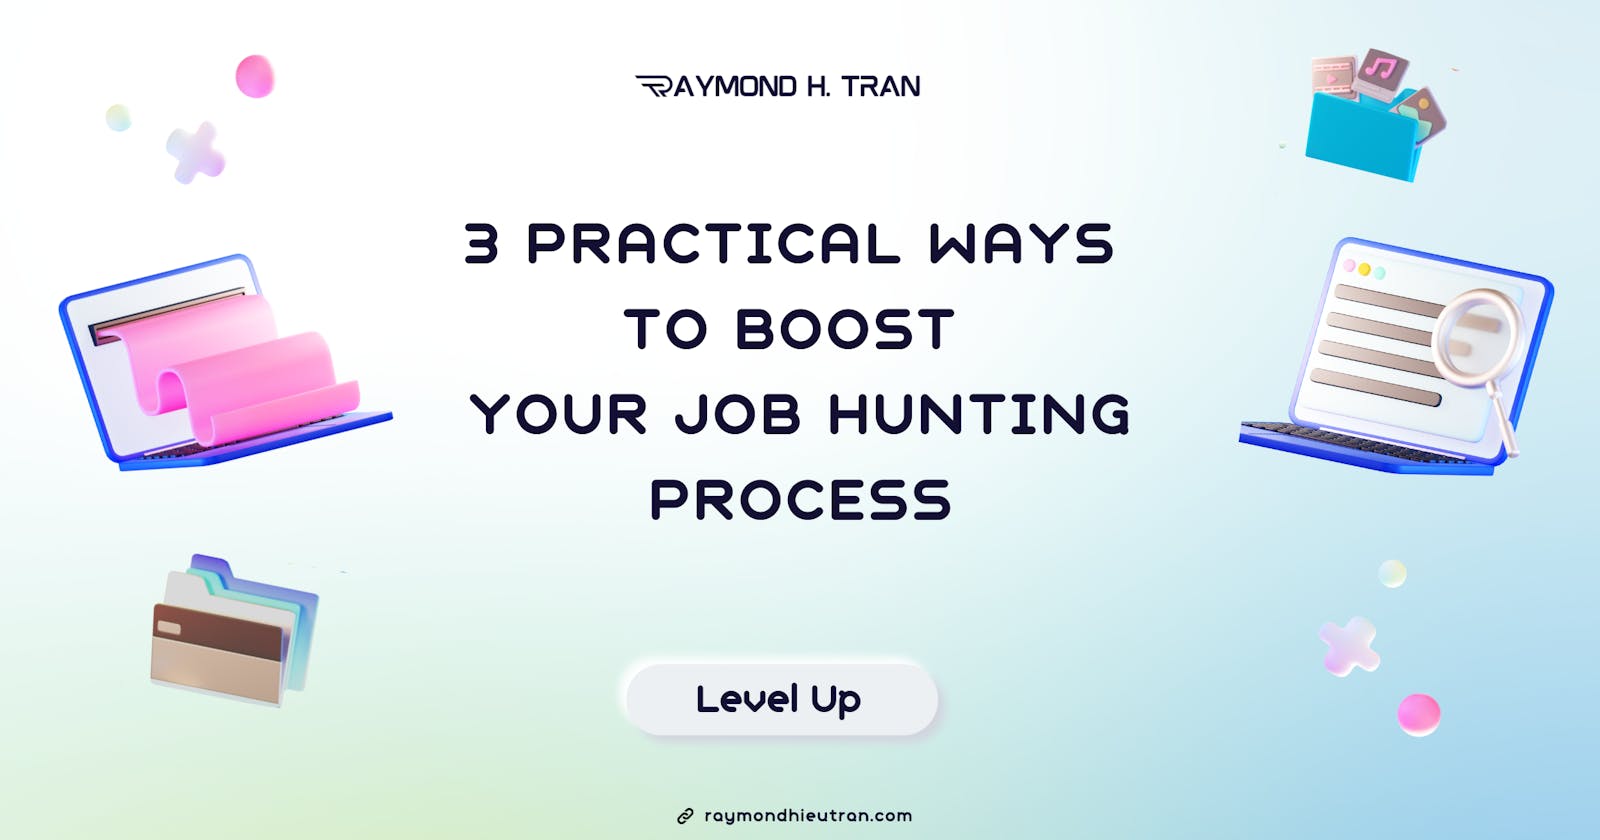 3 Practical Ways To Boost Your Job Hunting Process